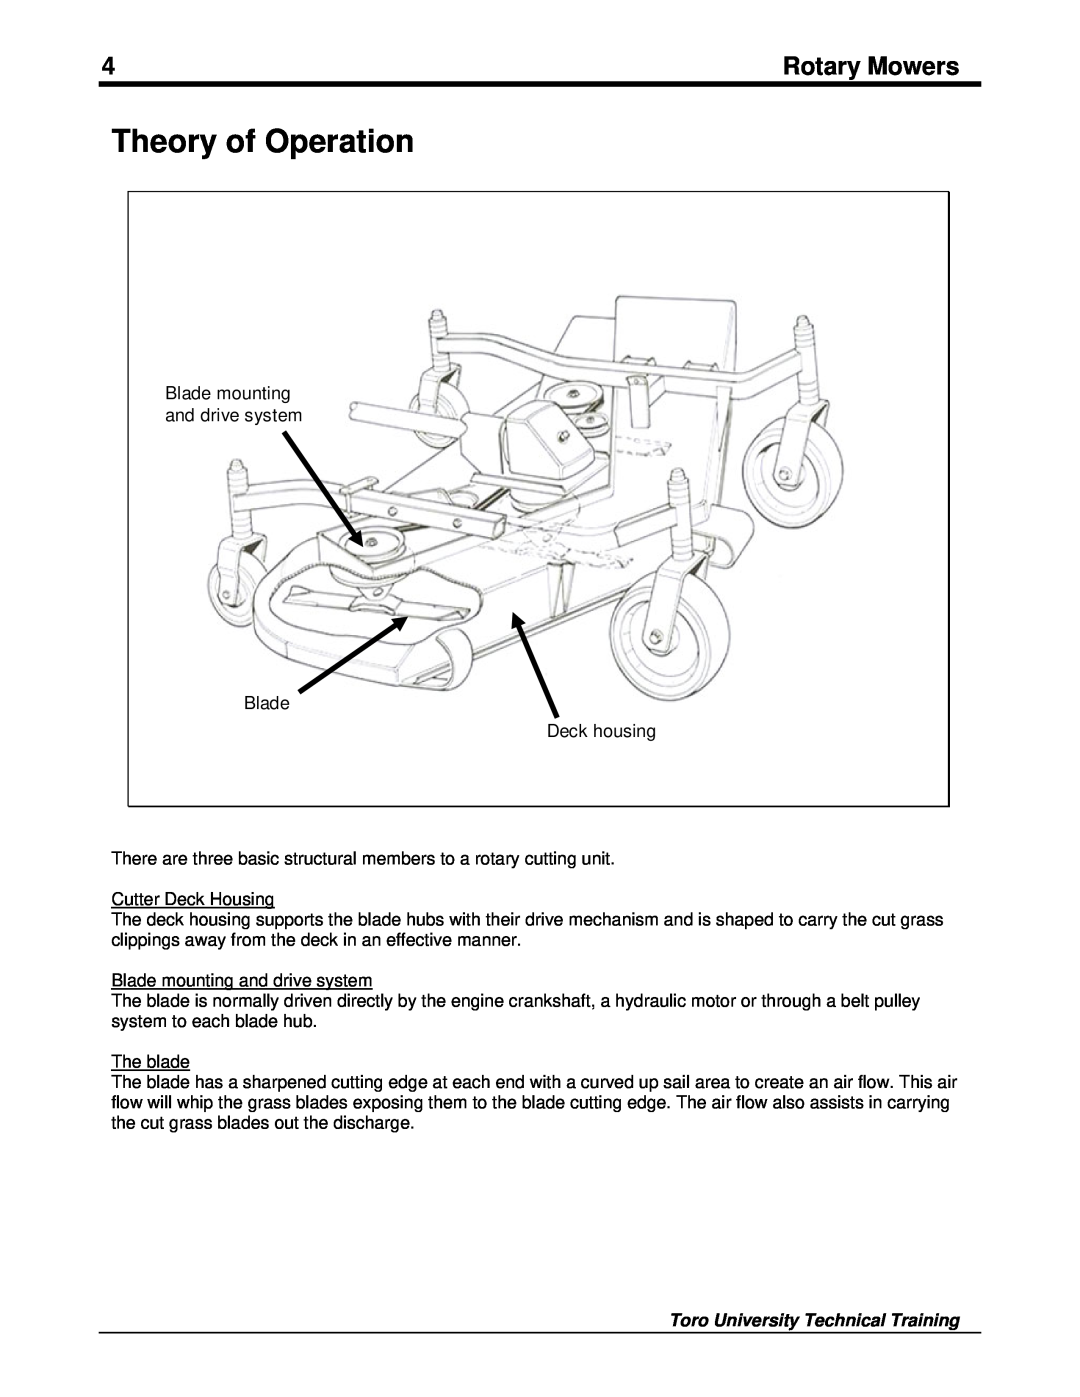 Toro 09167SL manual Theory of Operation, Rotary Mowers, Blade mounting and drive system Blade, Deck housing 